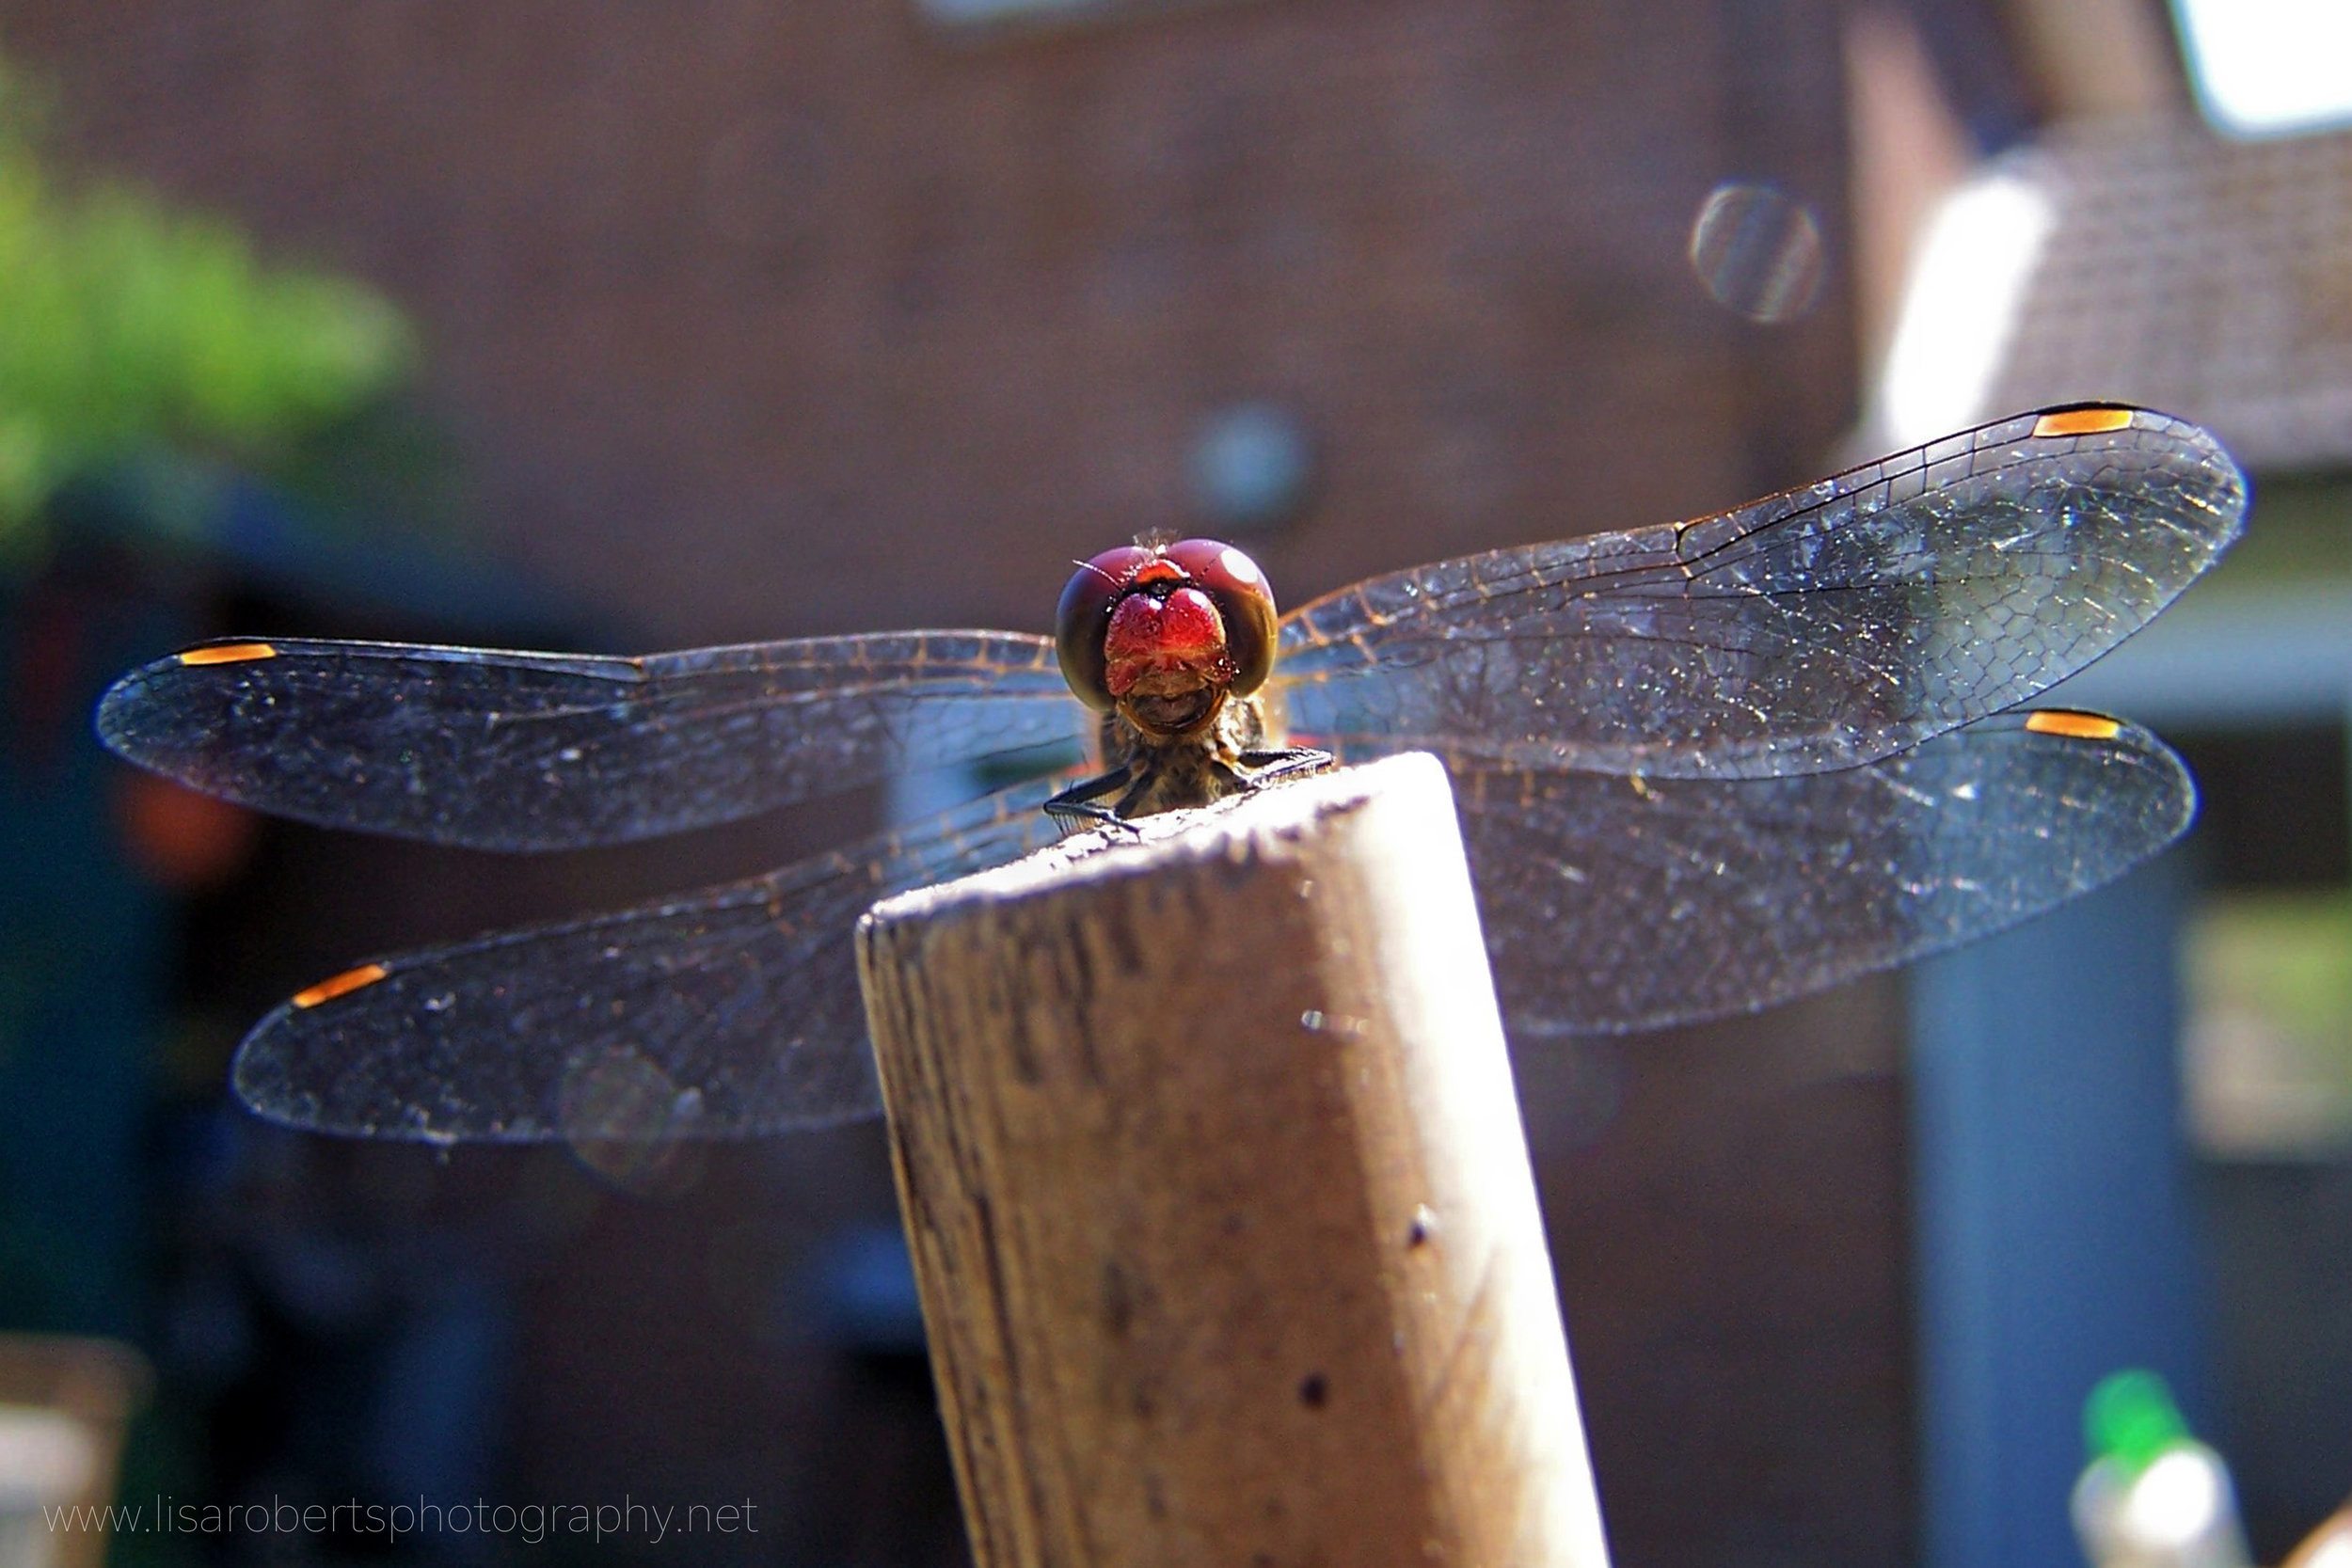  Male Common Darter Dragonfly on post 